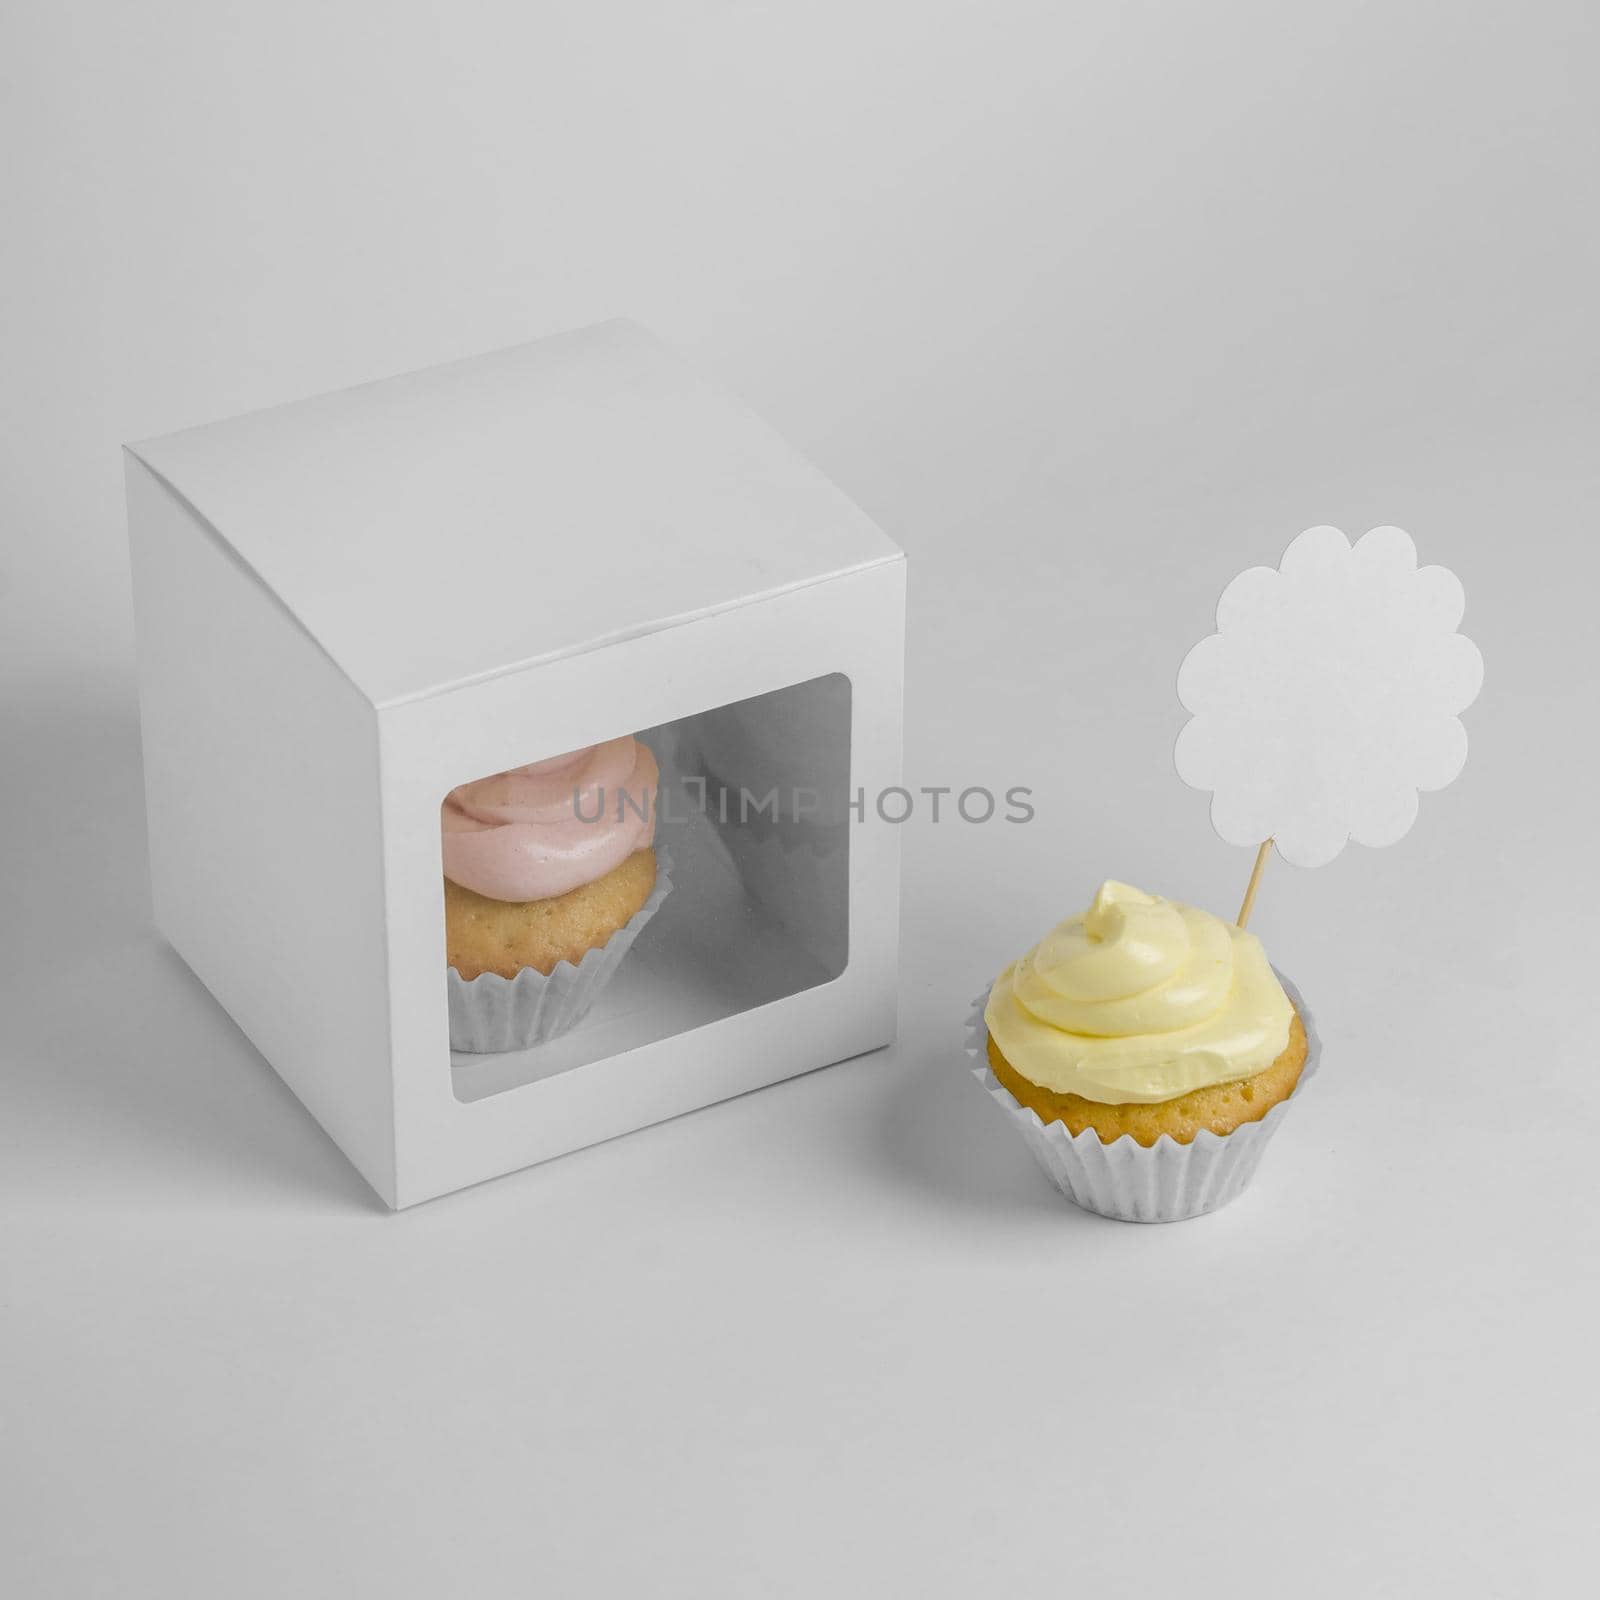 high angle two cupcakes with packaging box